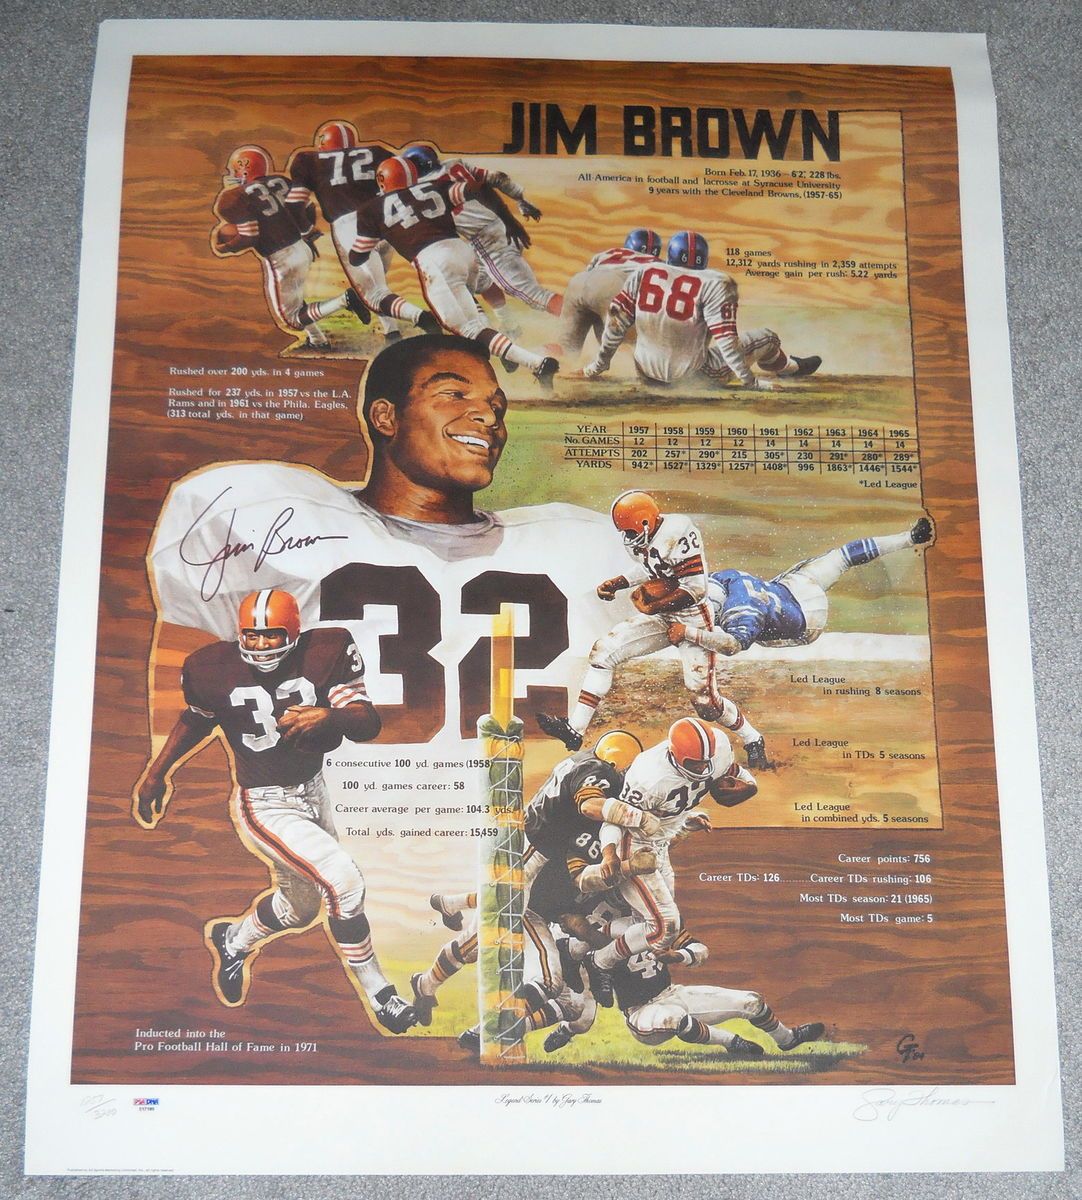   BROWNS JIM BROWN PSA DNA SIGNED AUTO POSTER 26x33 d 3200 GARY THOMAS